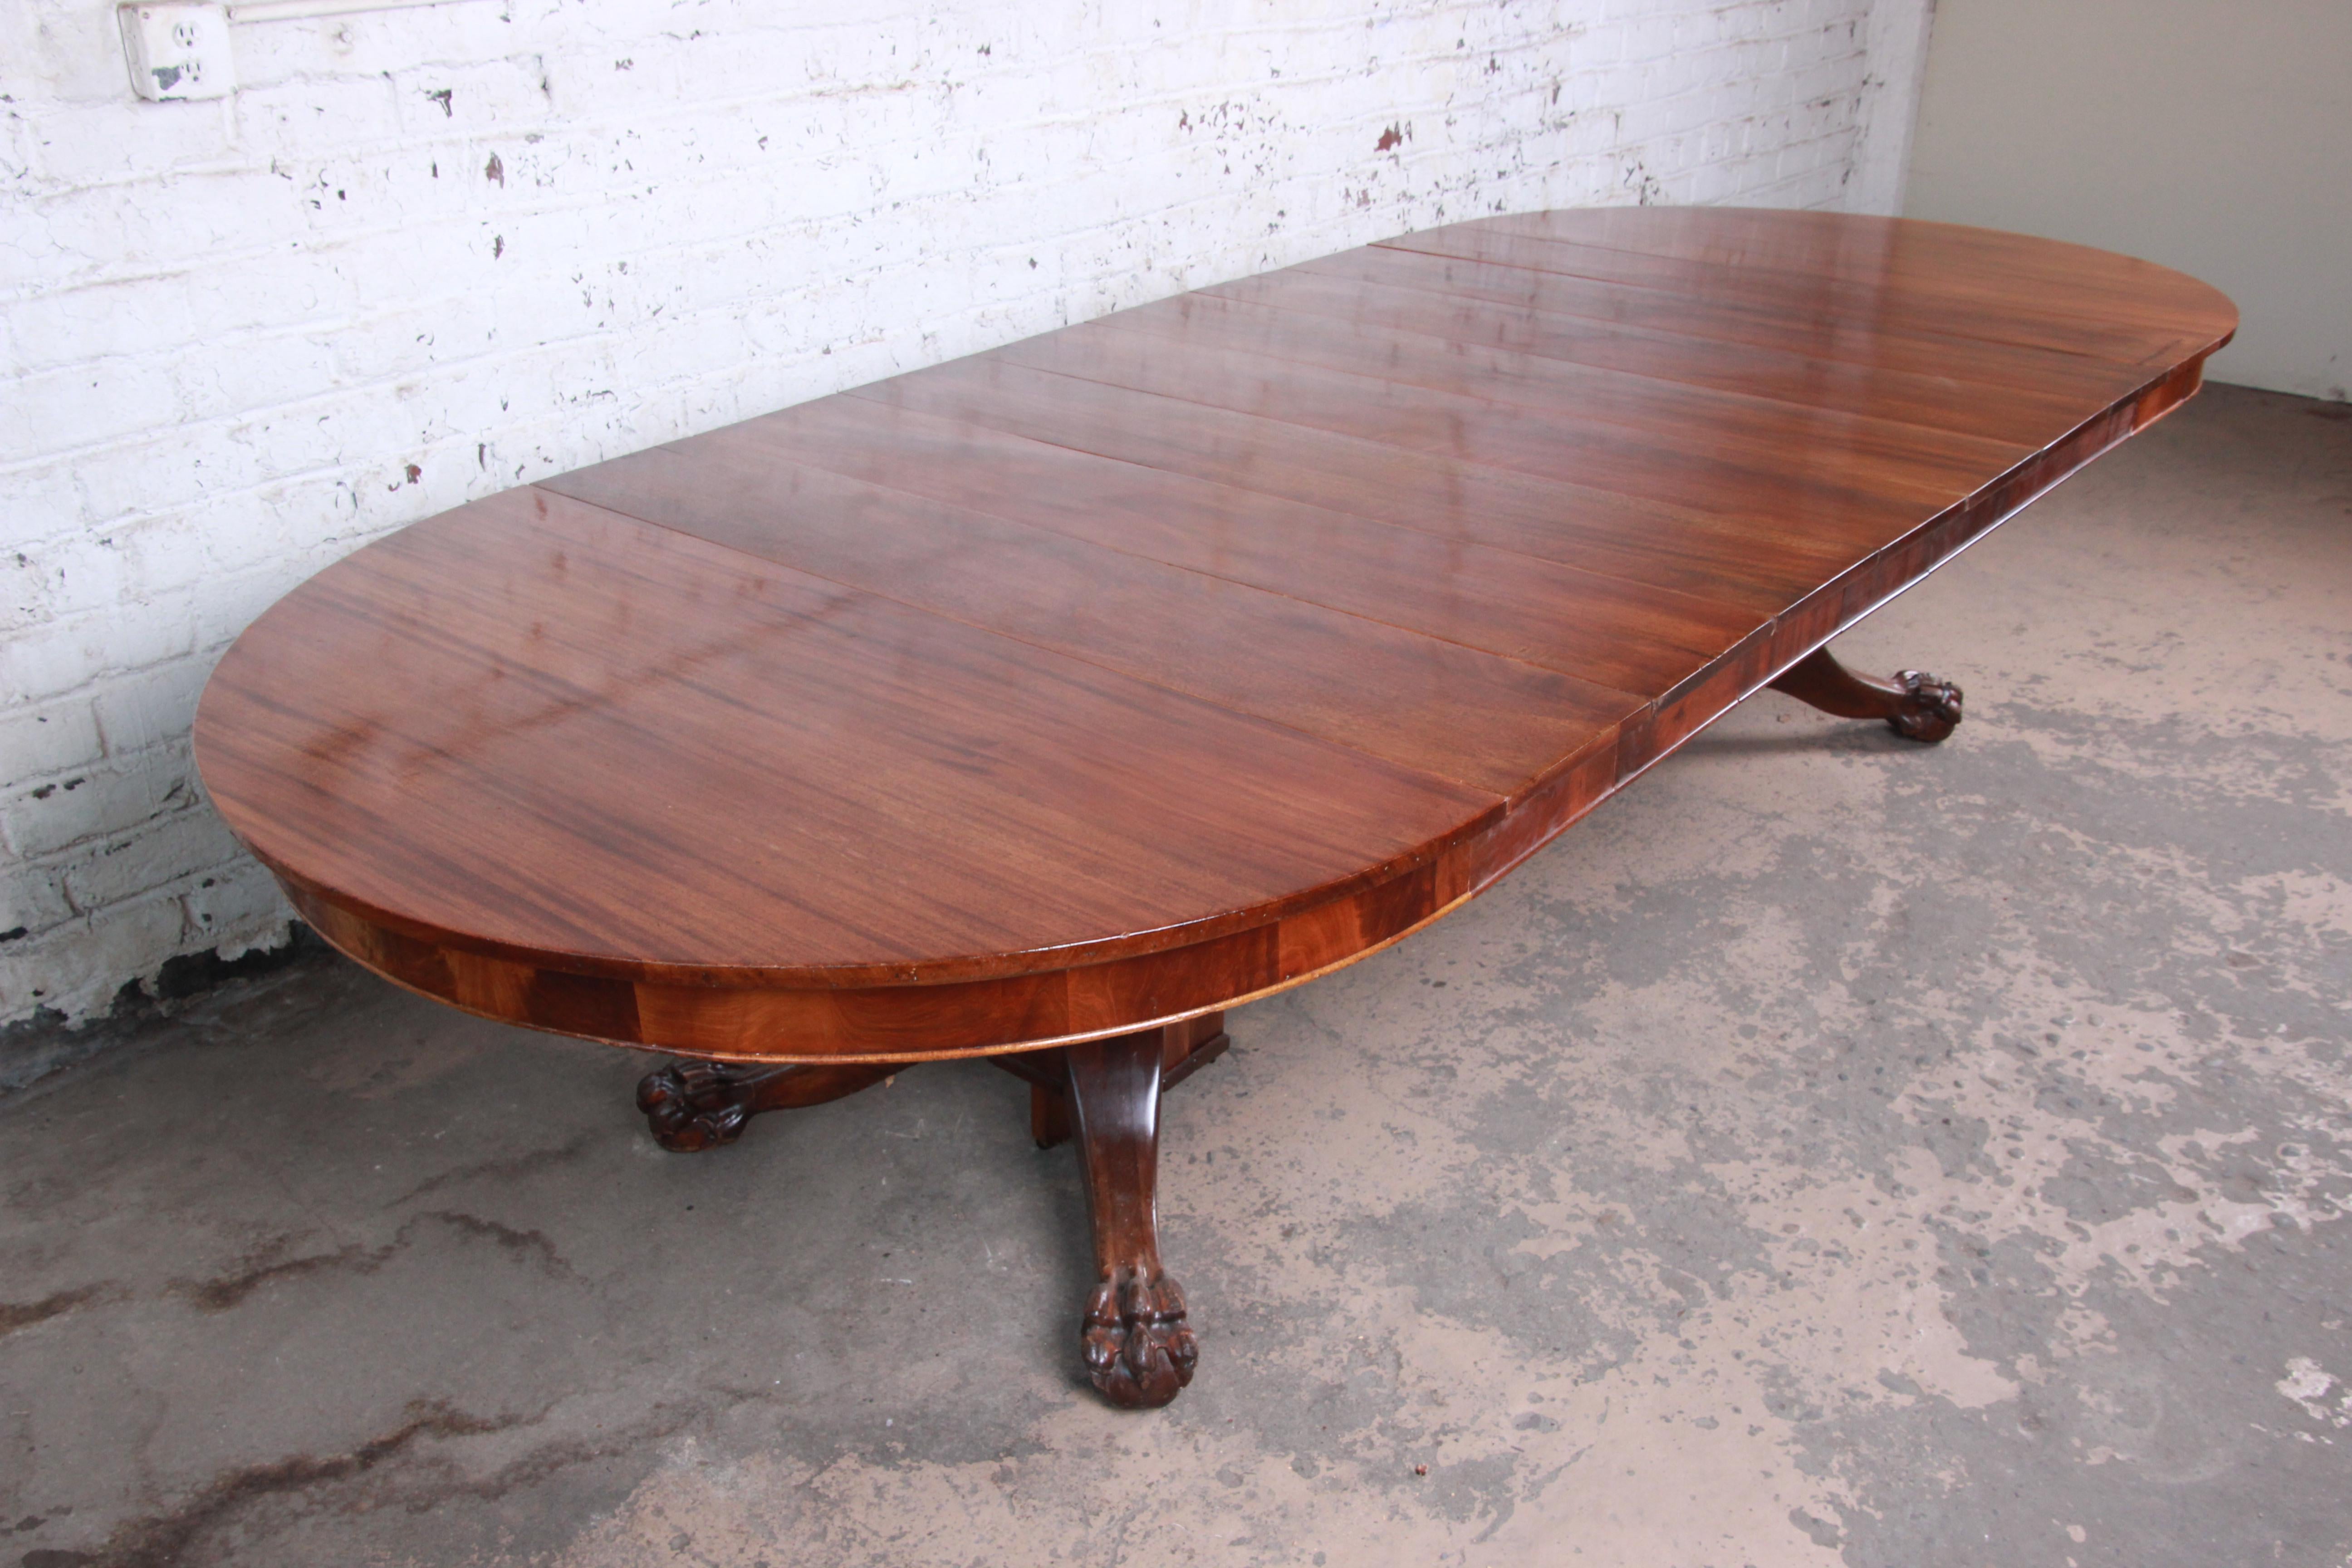 British Colonial Antique Mahogany Pawfoot Pedestal Extension Dining Table with Eight Leaves